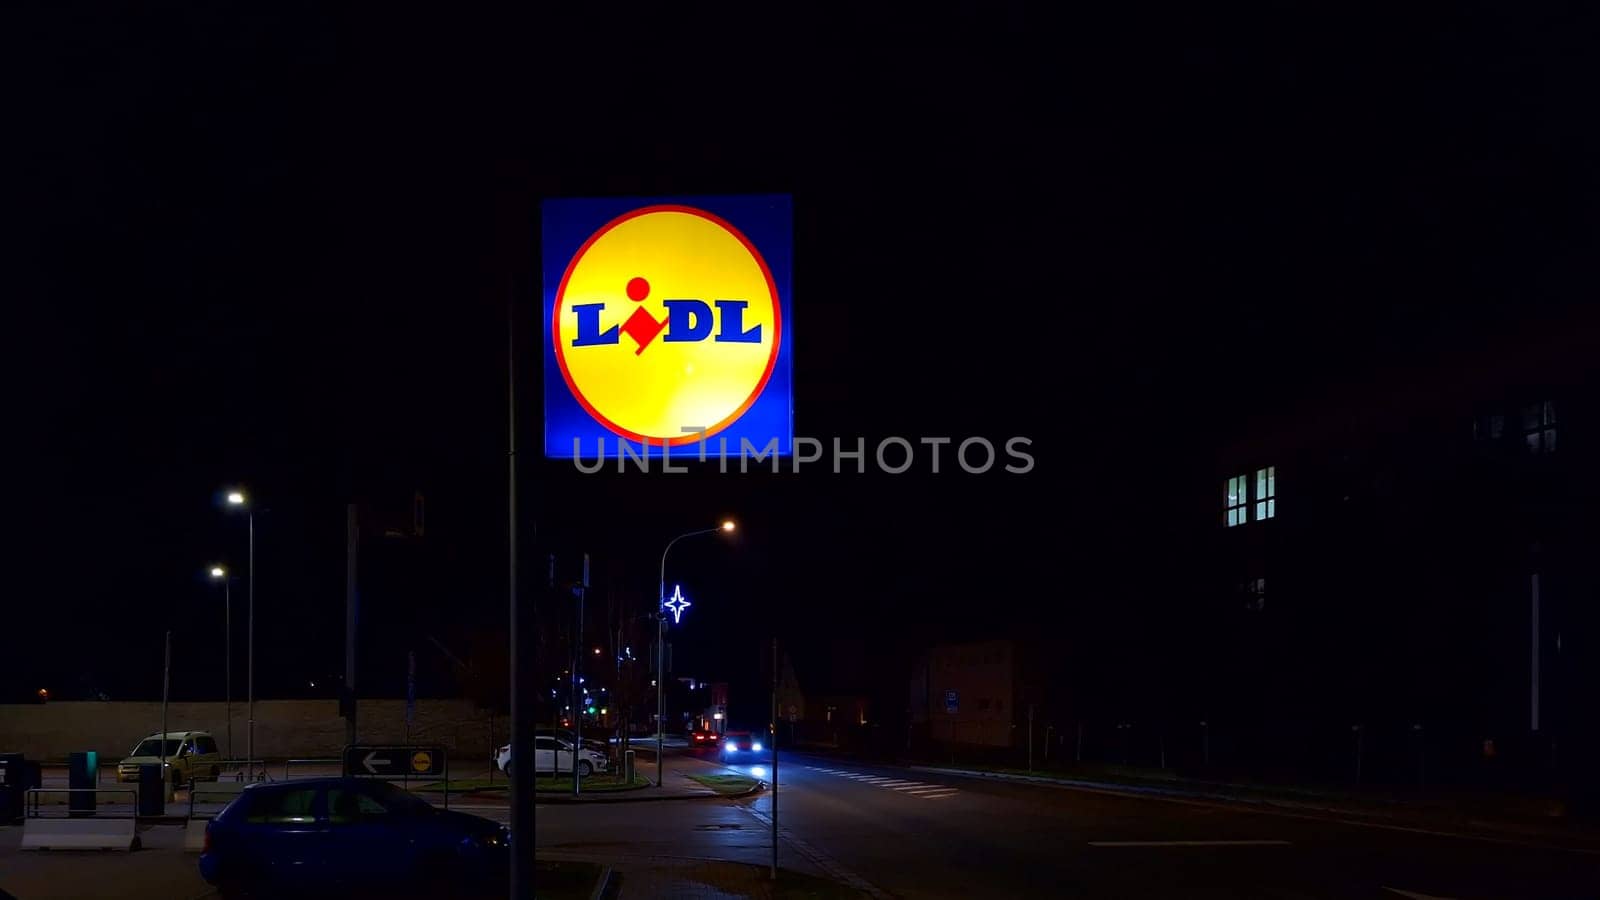 HUSTOPECE, CZECH REPUBLIC - DECEMBER 17, 2023: LIDL logo on hypermarket from German chain, part of Schwartz Gruppe which also owns Kaufland. Lidl is a German international discount retailer chain that operates over 12,000 stores, present in every member state of the European Union, Serbia, Switzerland, the United Kingdom and the United States.